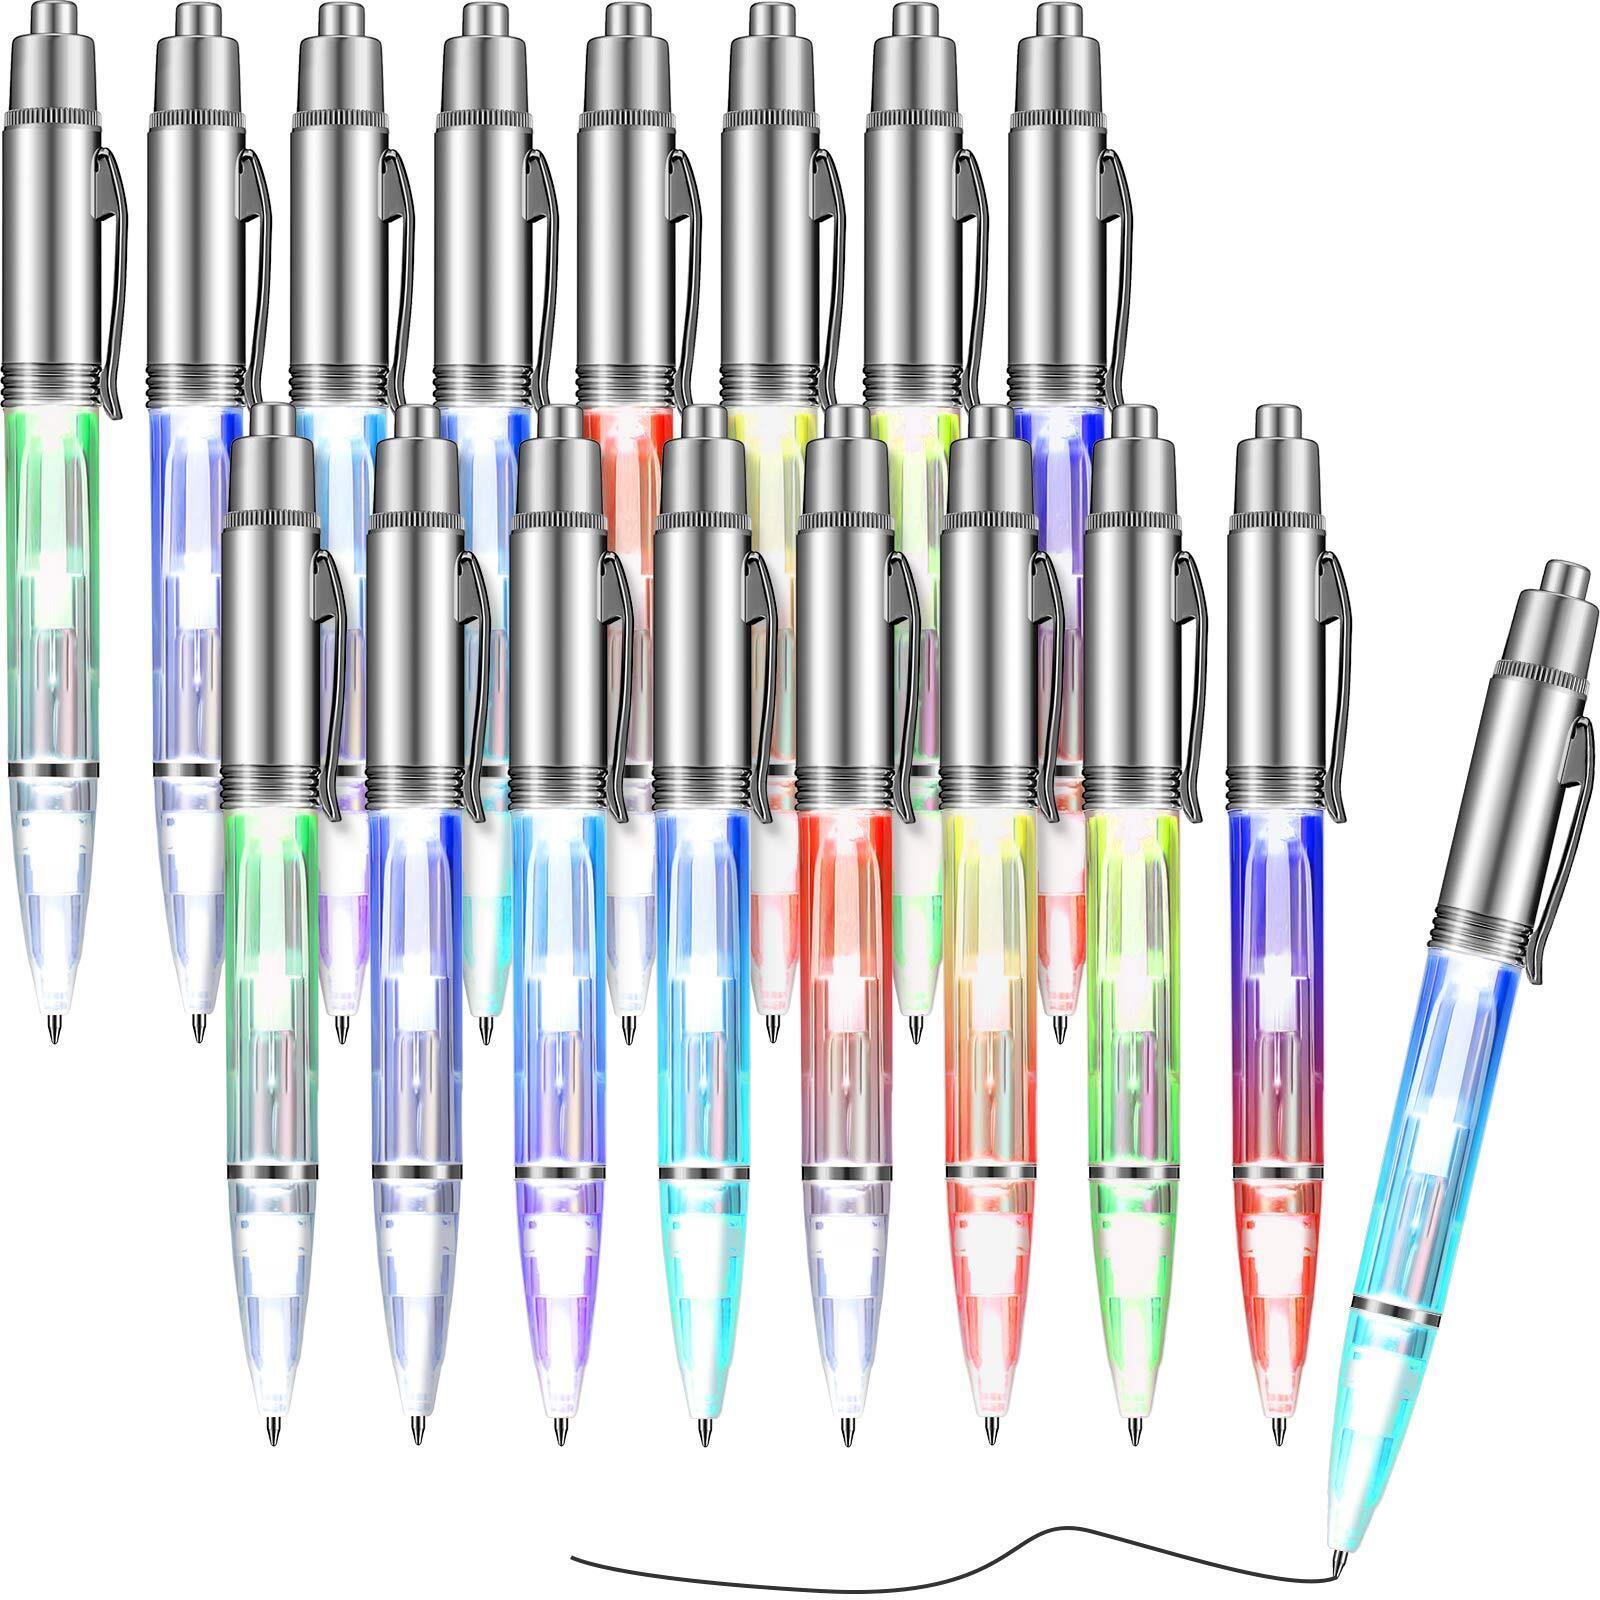 16 Pcs Lighted Tip Writing Pen Ballpoint Black Ink Color for Night Writing